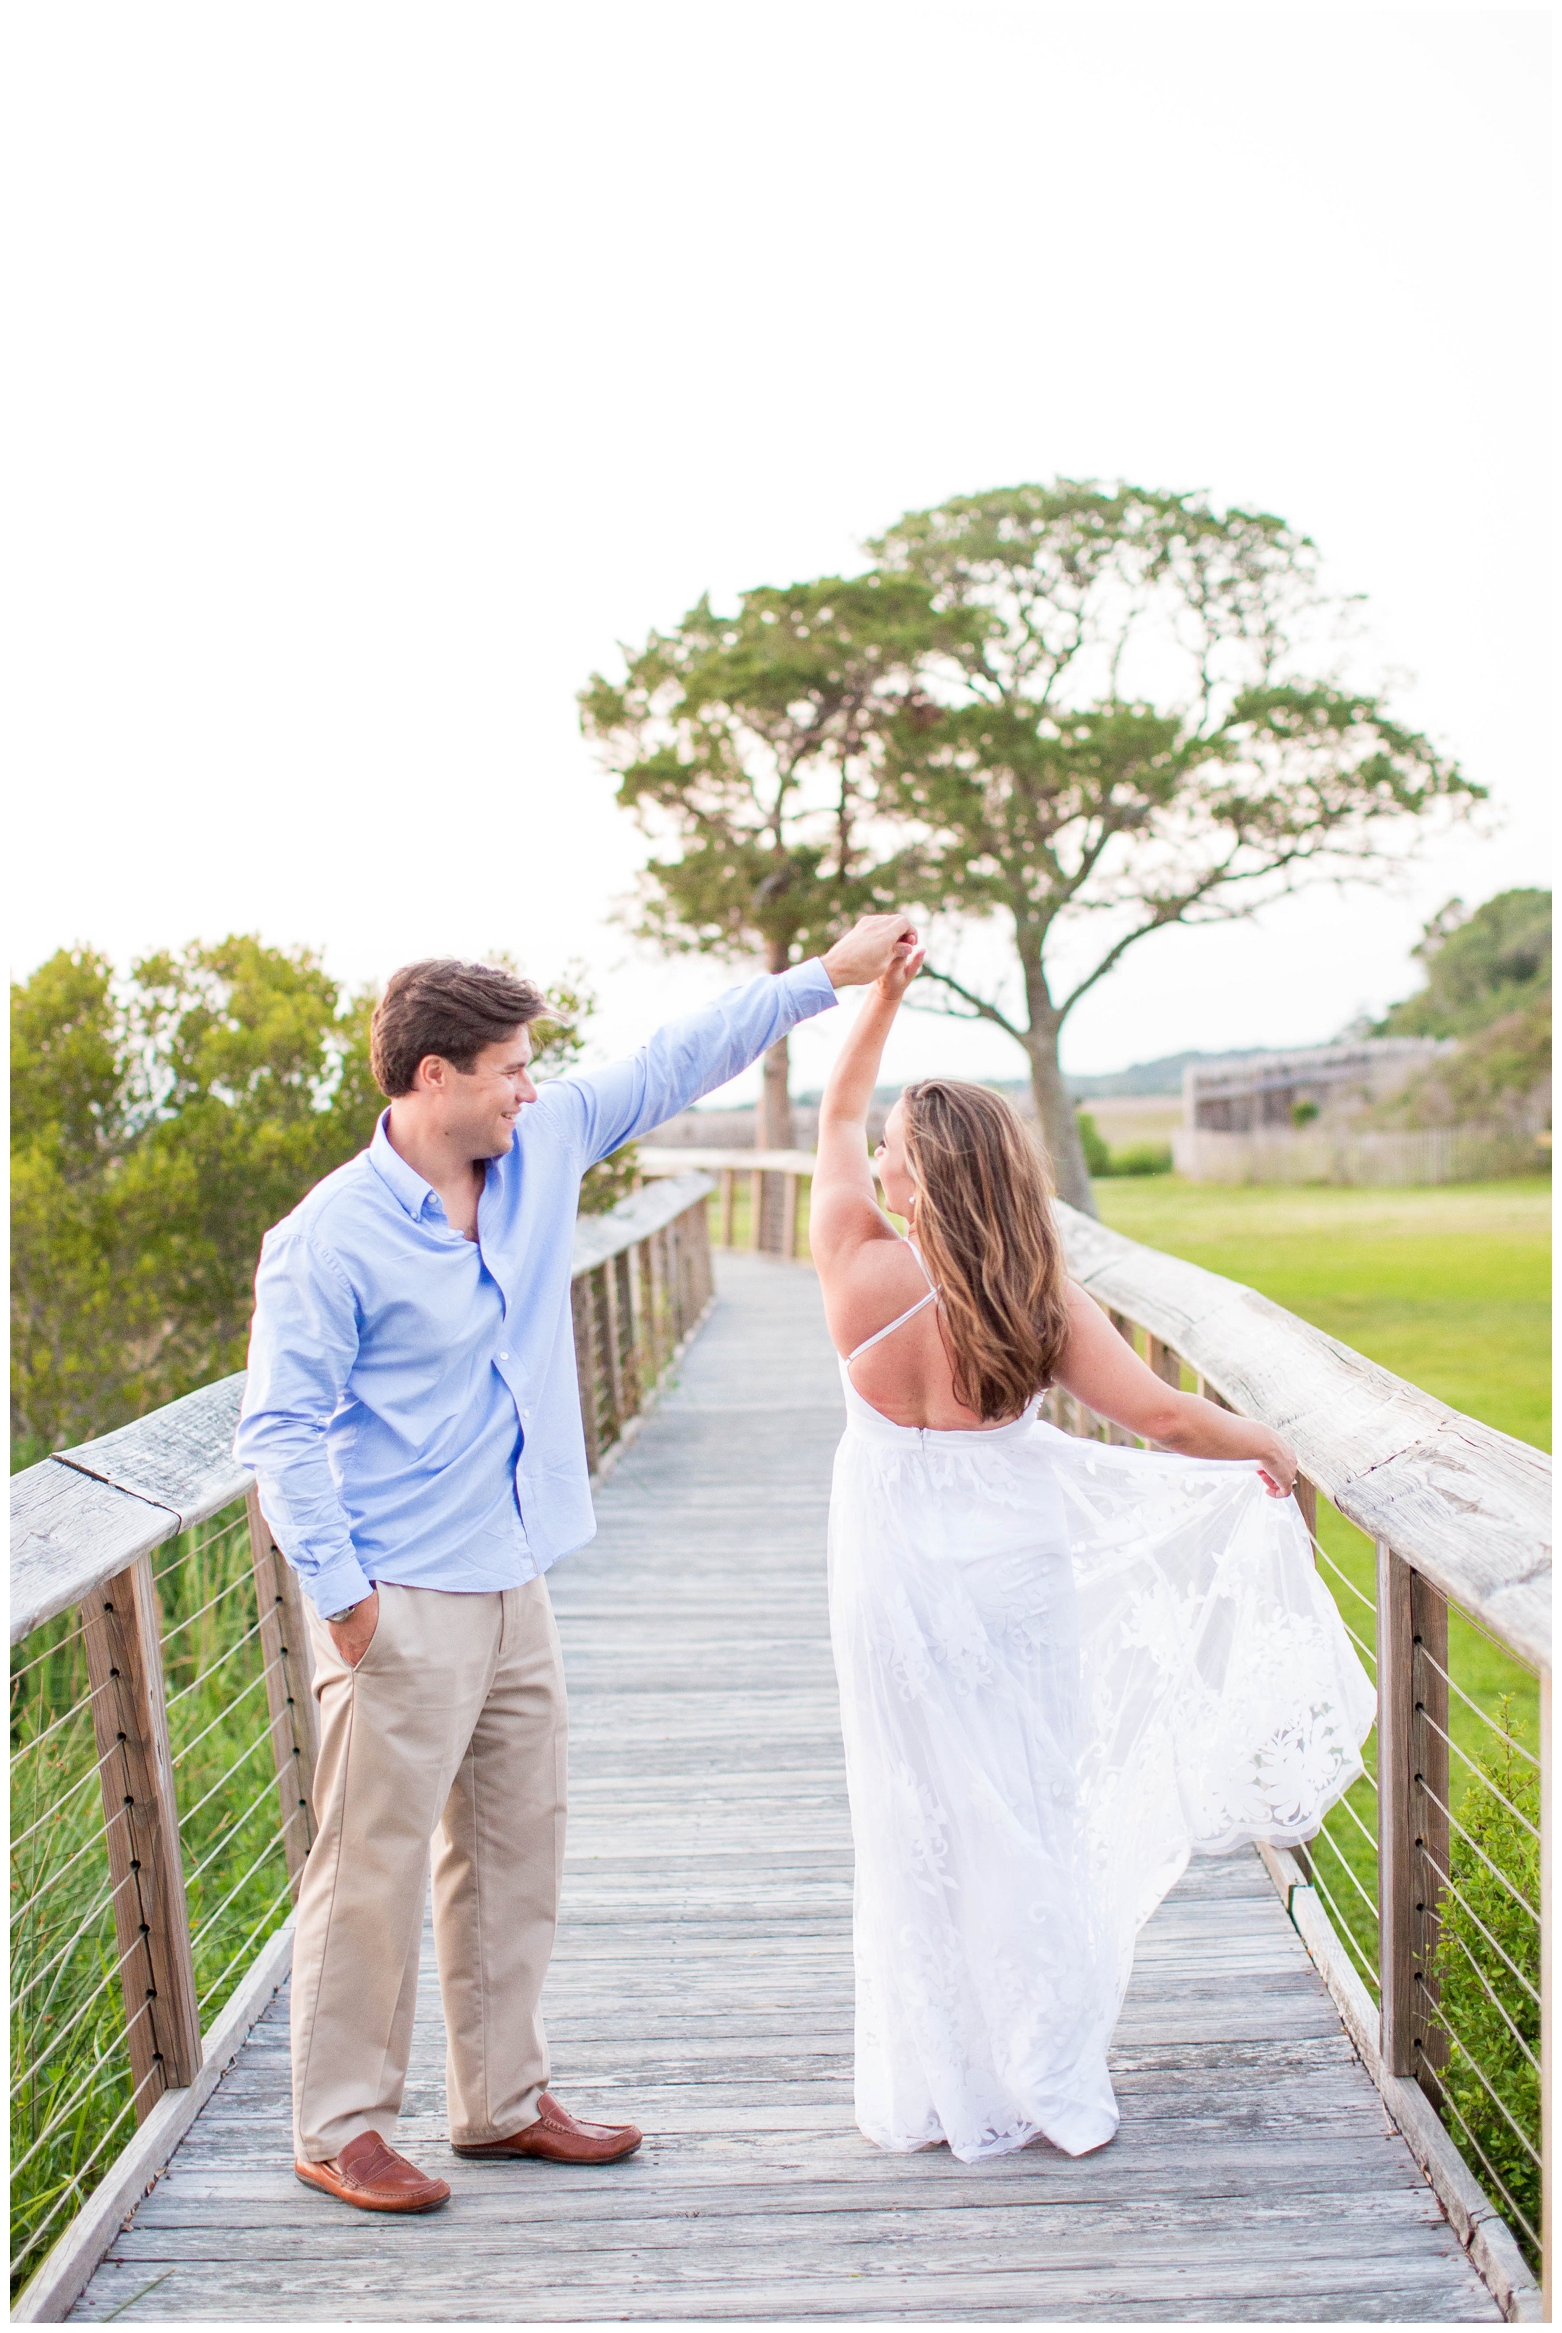 View More: http://hopetaylorphotographyphotos.pass.us/kelley-and-perry-engagement